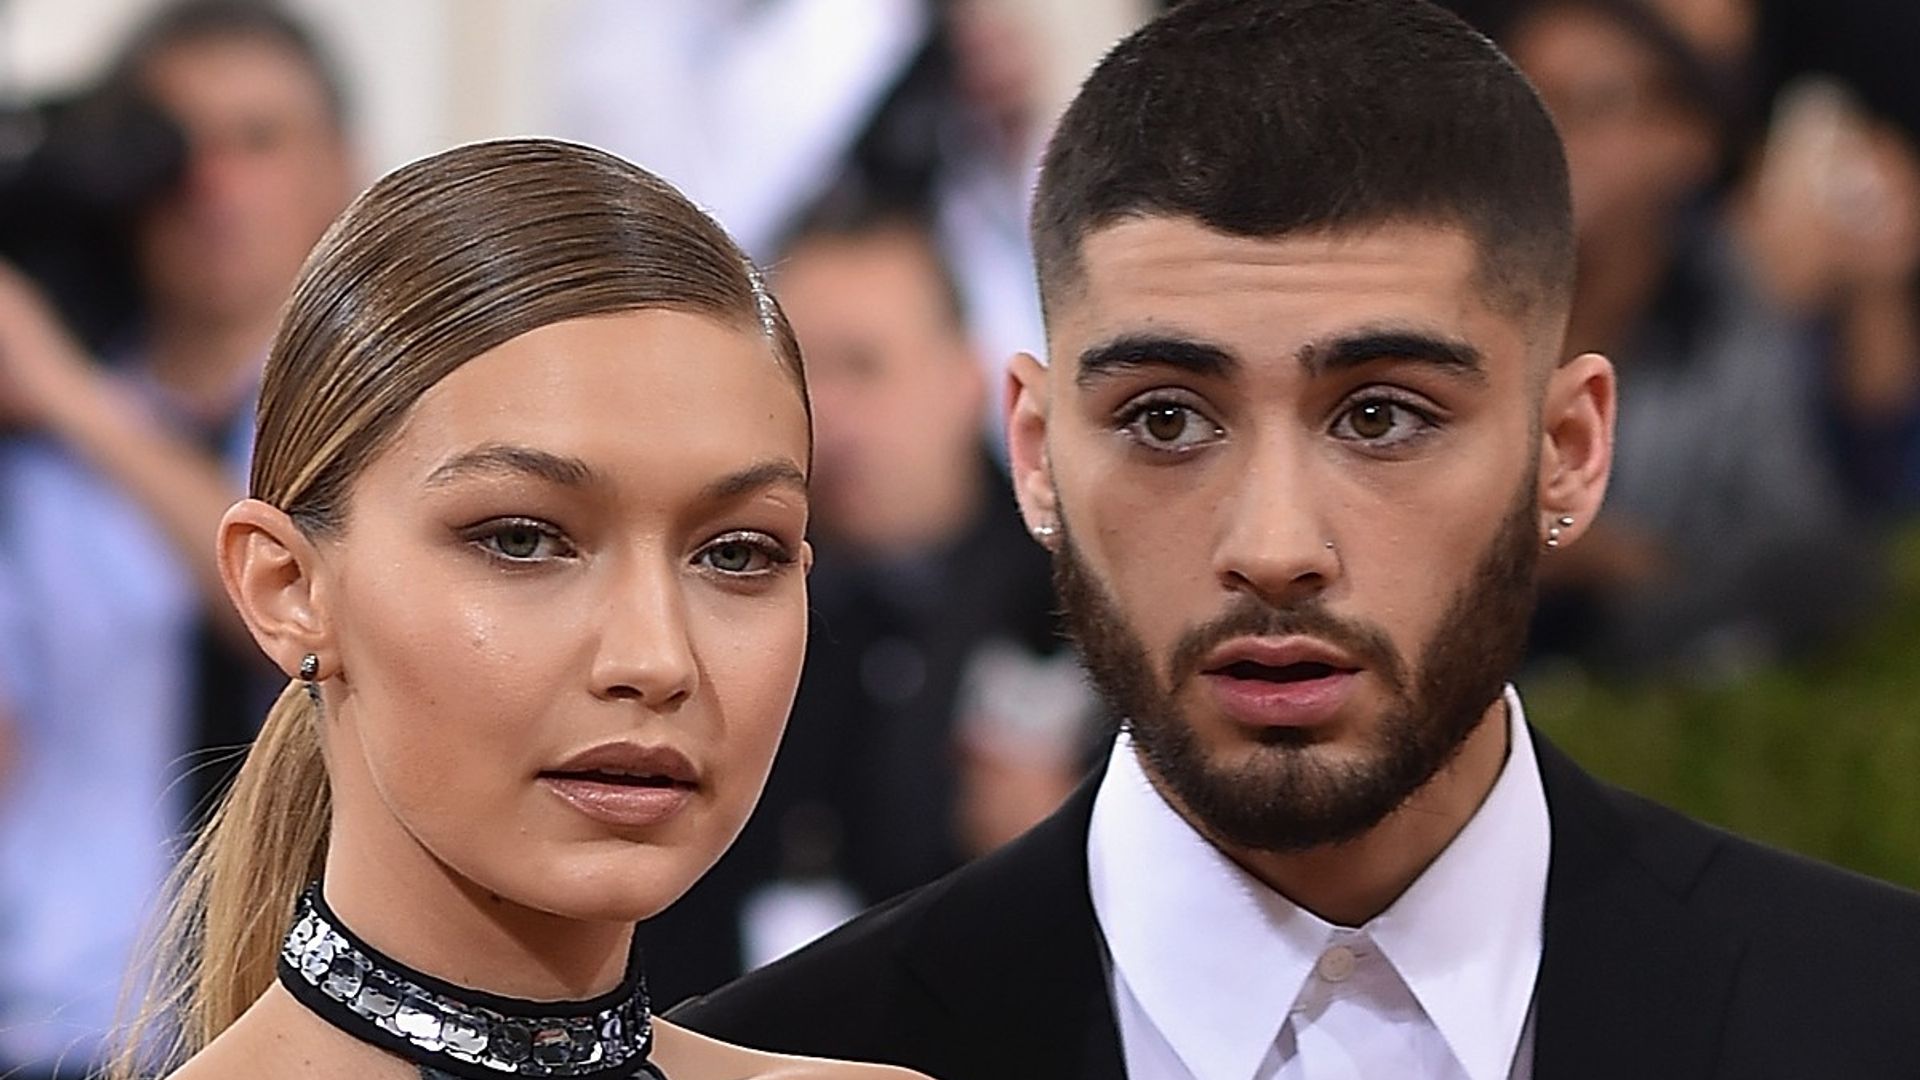 Zayn Malik, Gigi Hadid's daughter surrounded by gifts